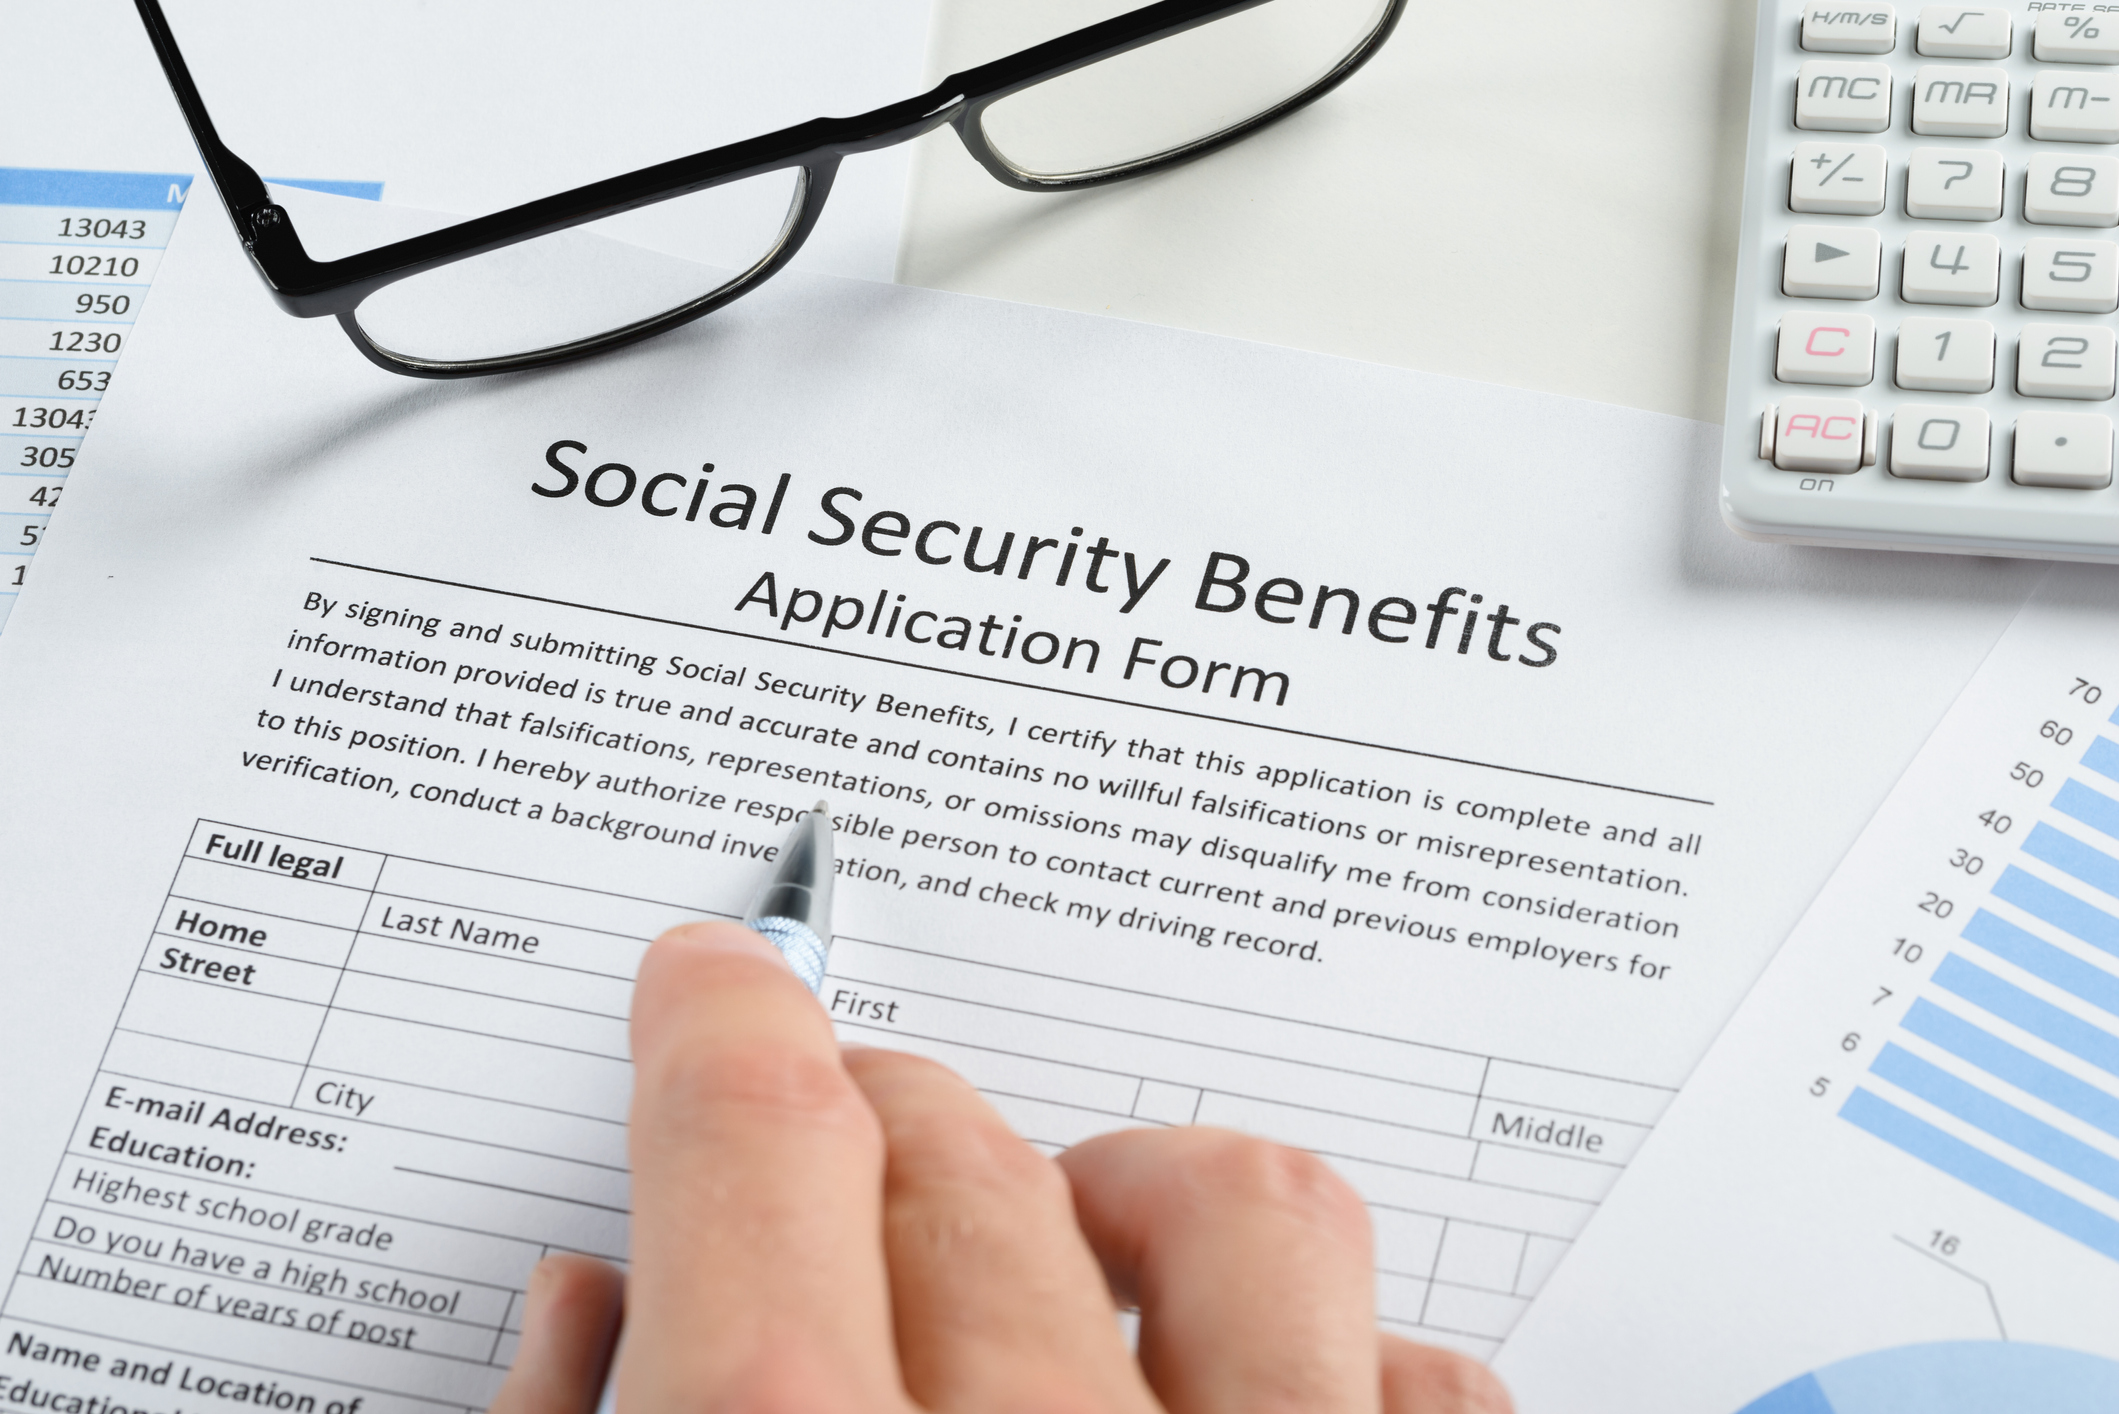 Be Part of the 4% When it Comes to Social Security